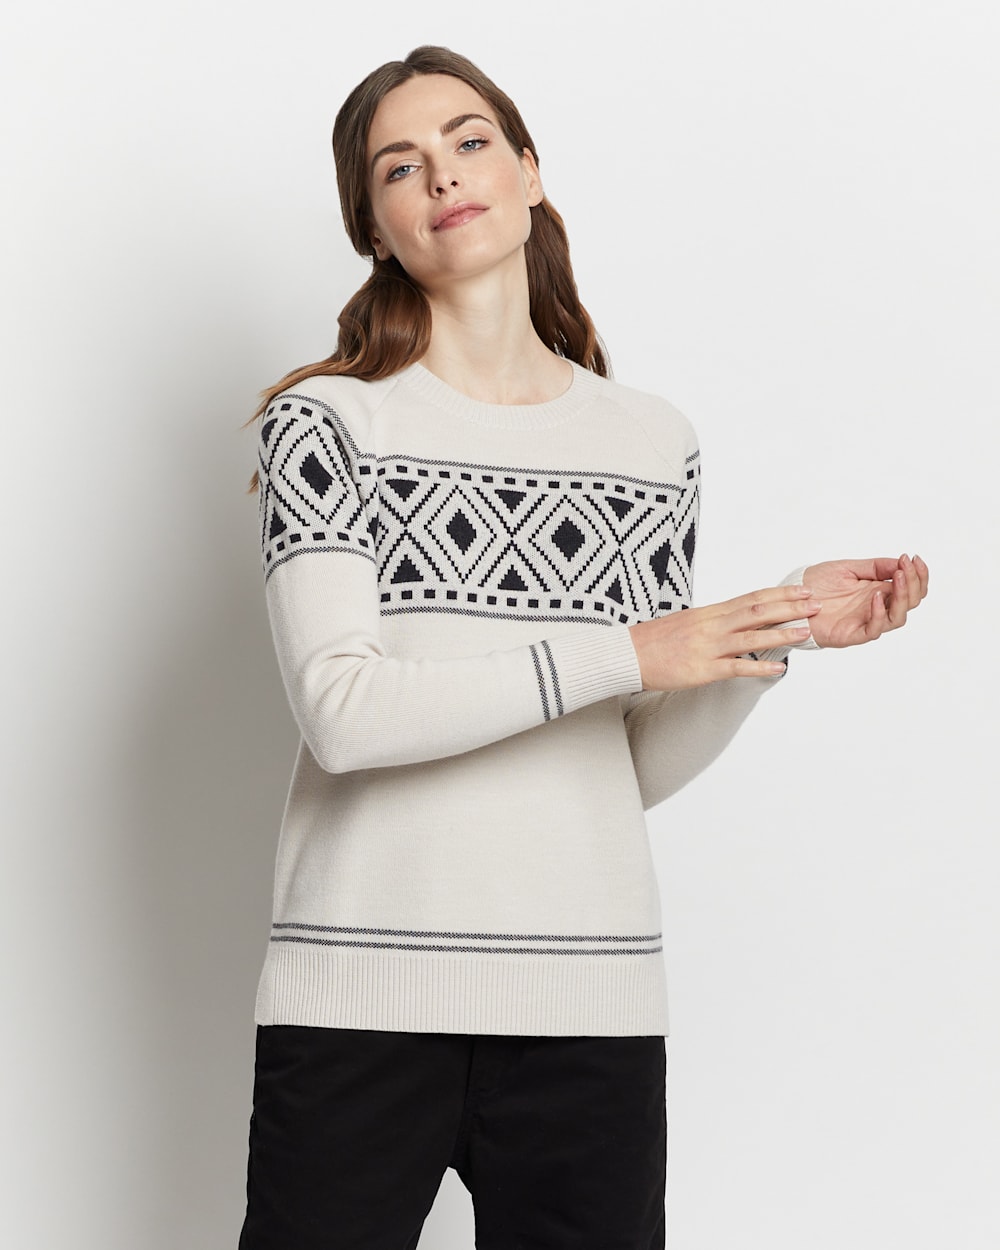 WOMEN'S GRAPHIC MERINO CREWNECK SWEATER IN IVORY/CHARCOAL image number 1